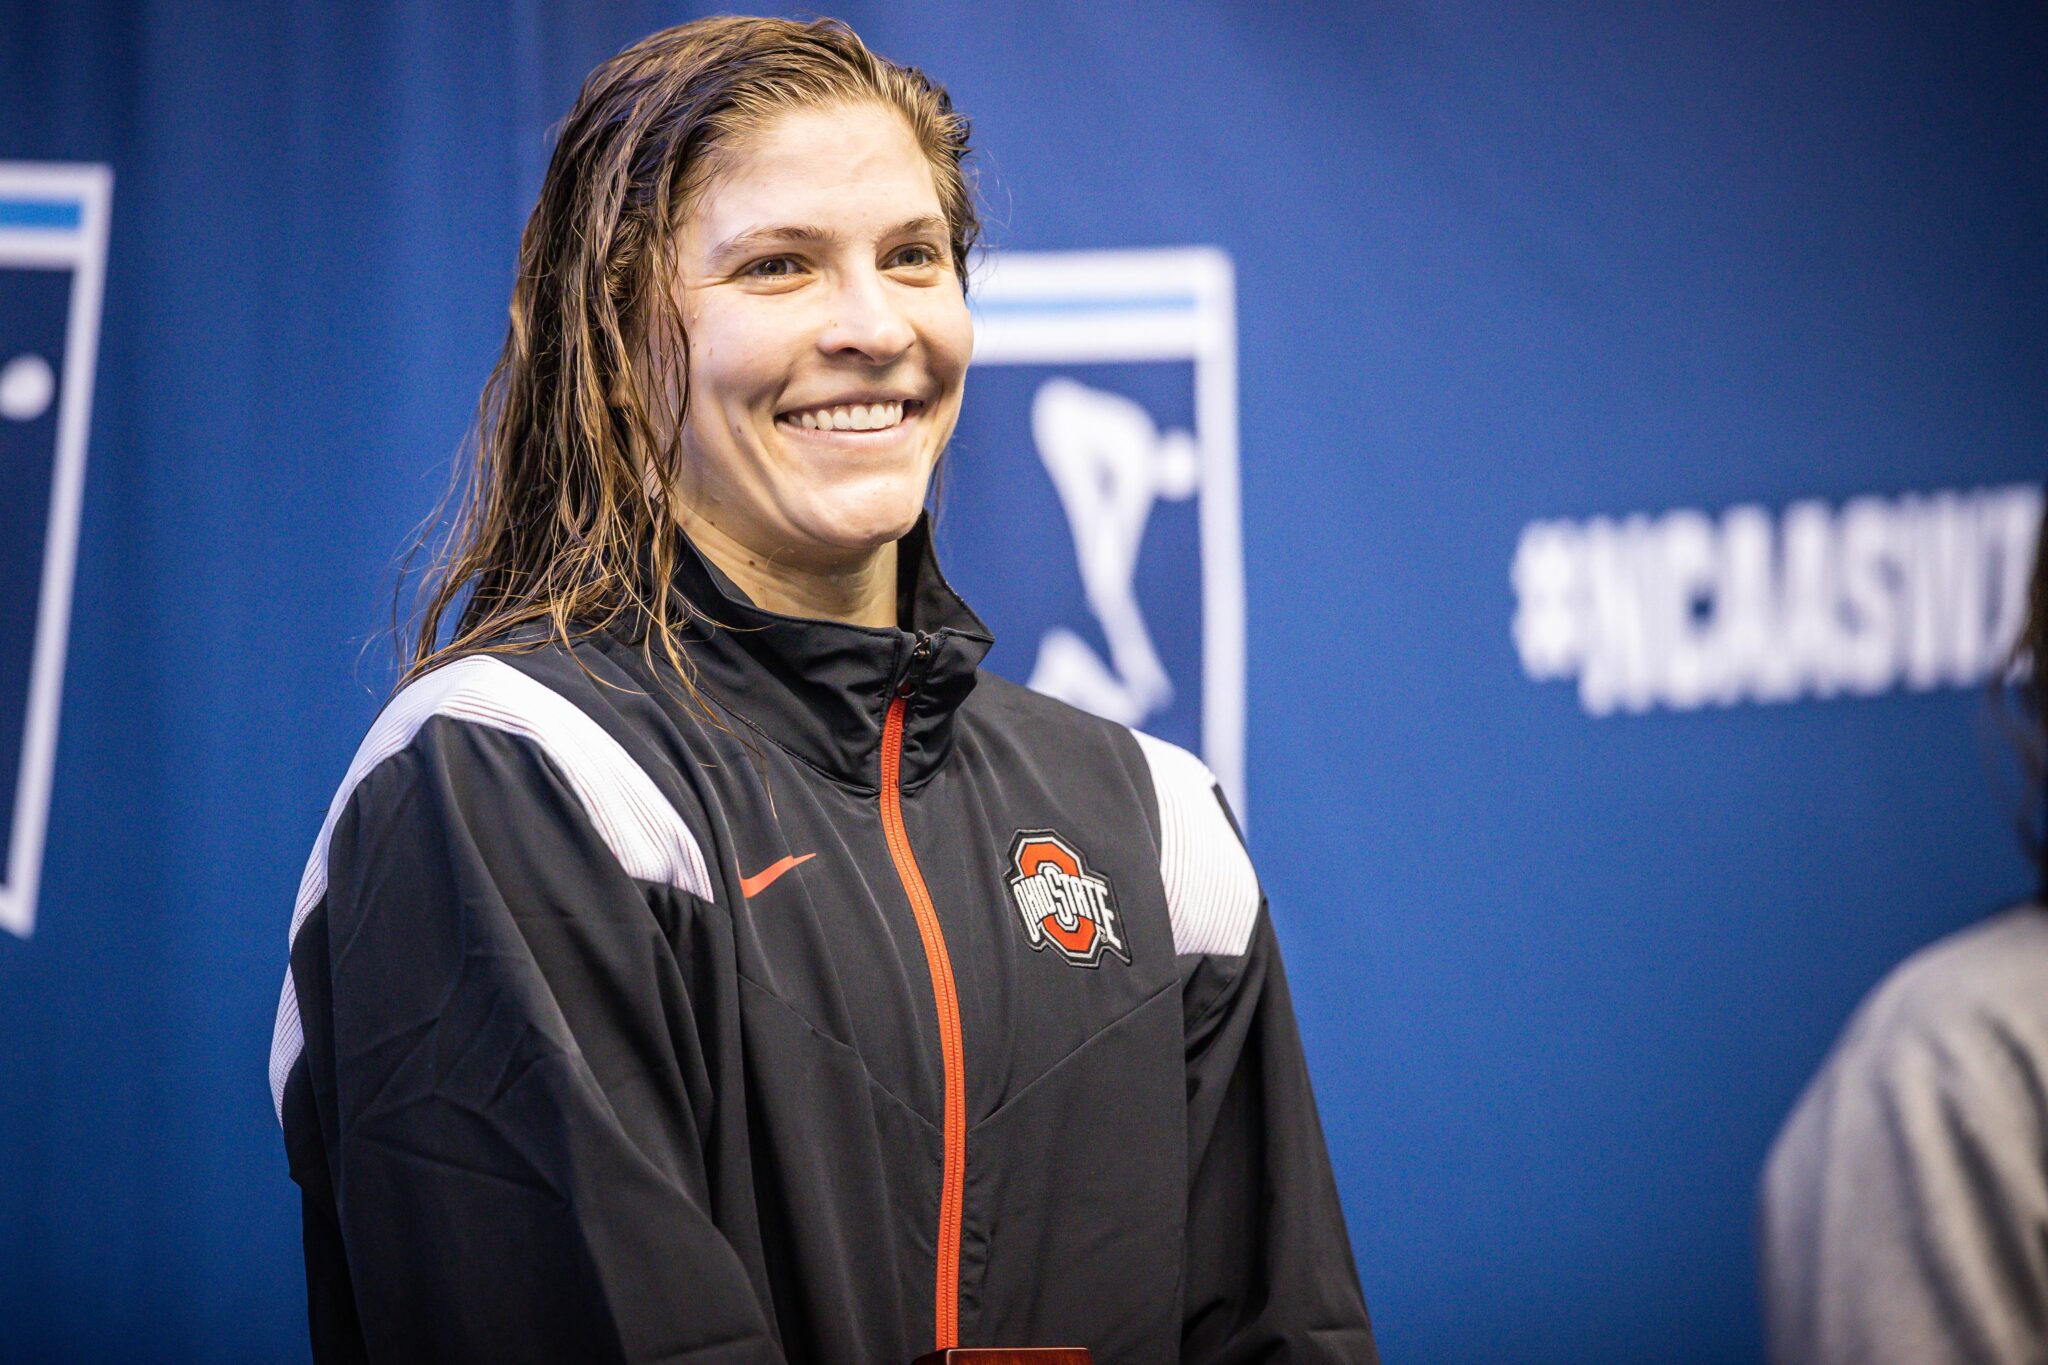 Josie Panitz Staying with Ohio State for 5th Year Instead of ...